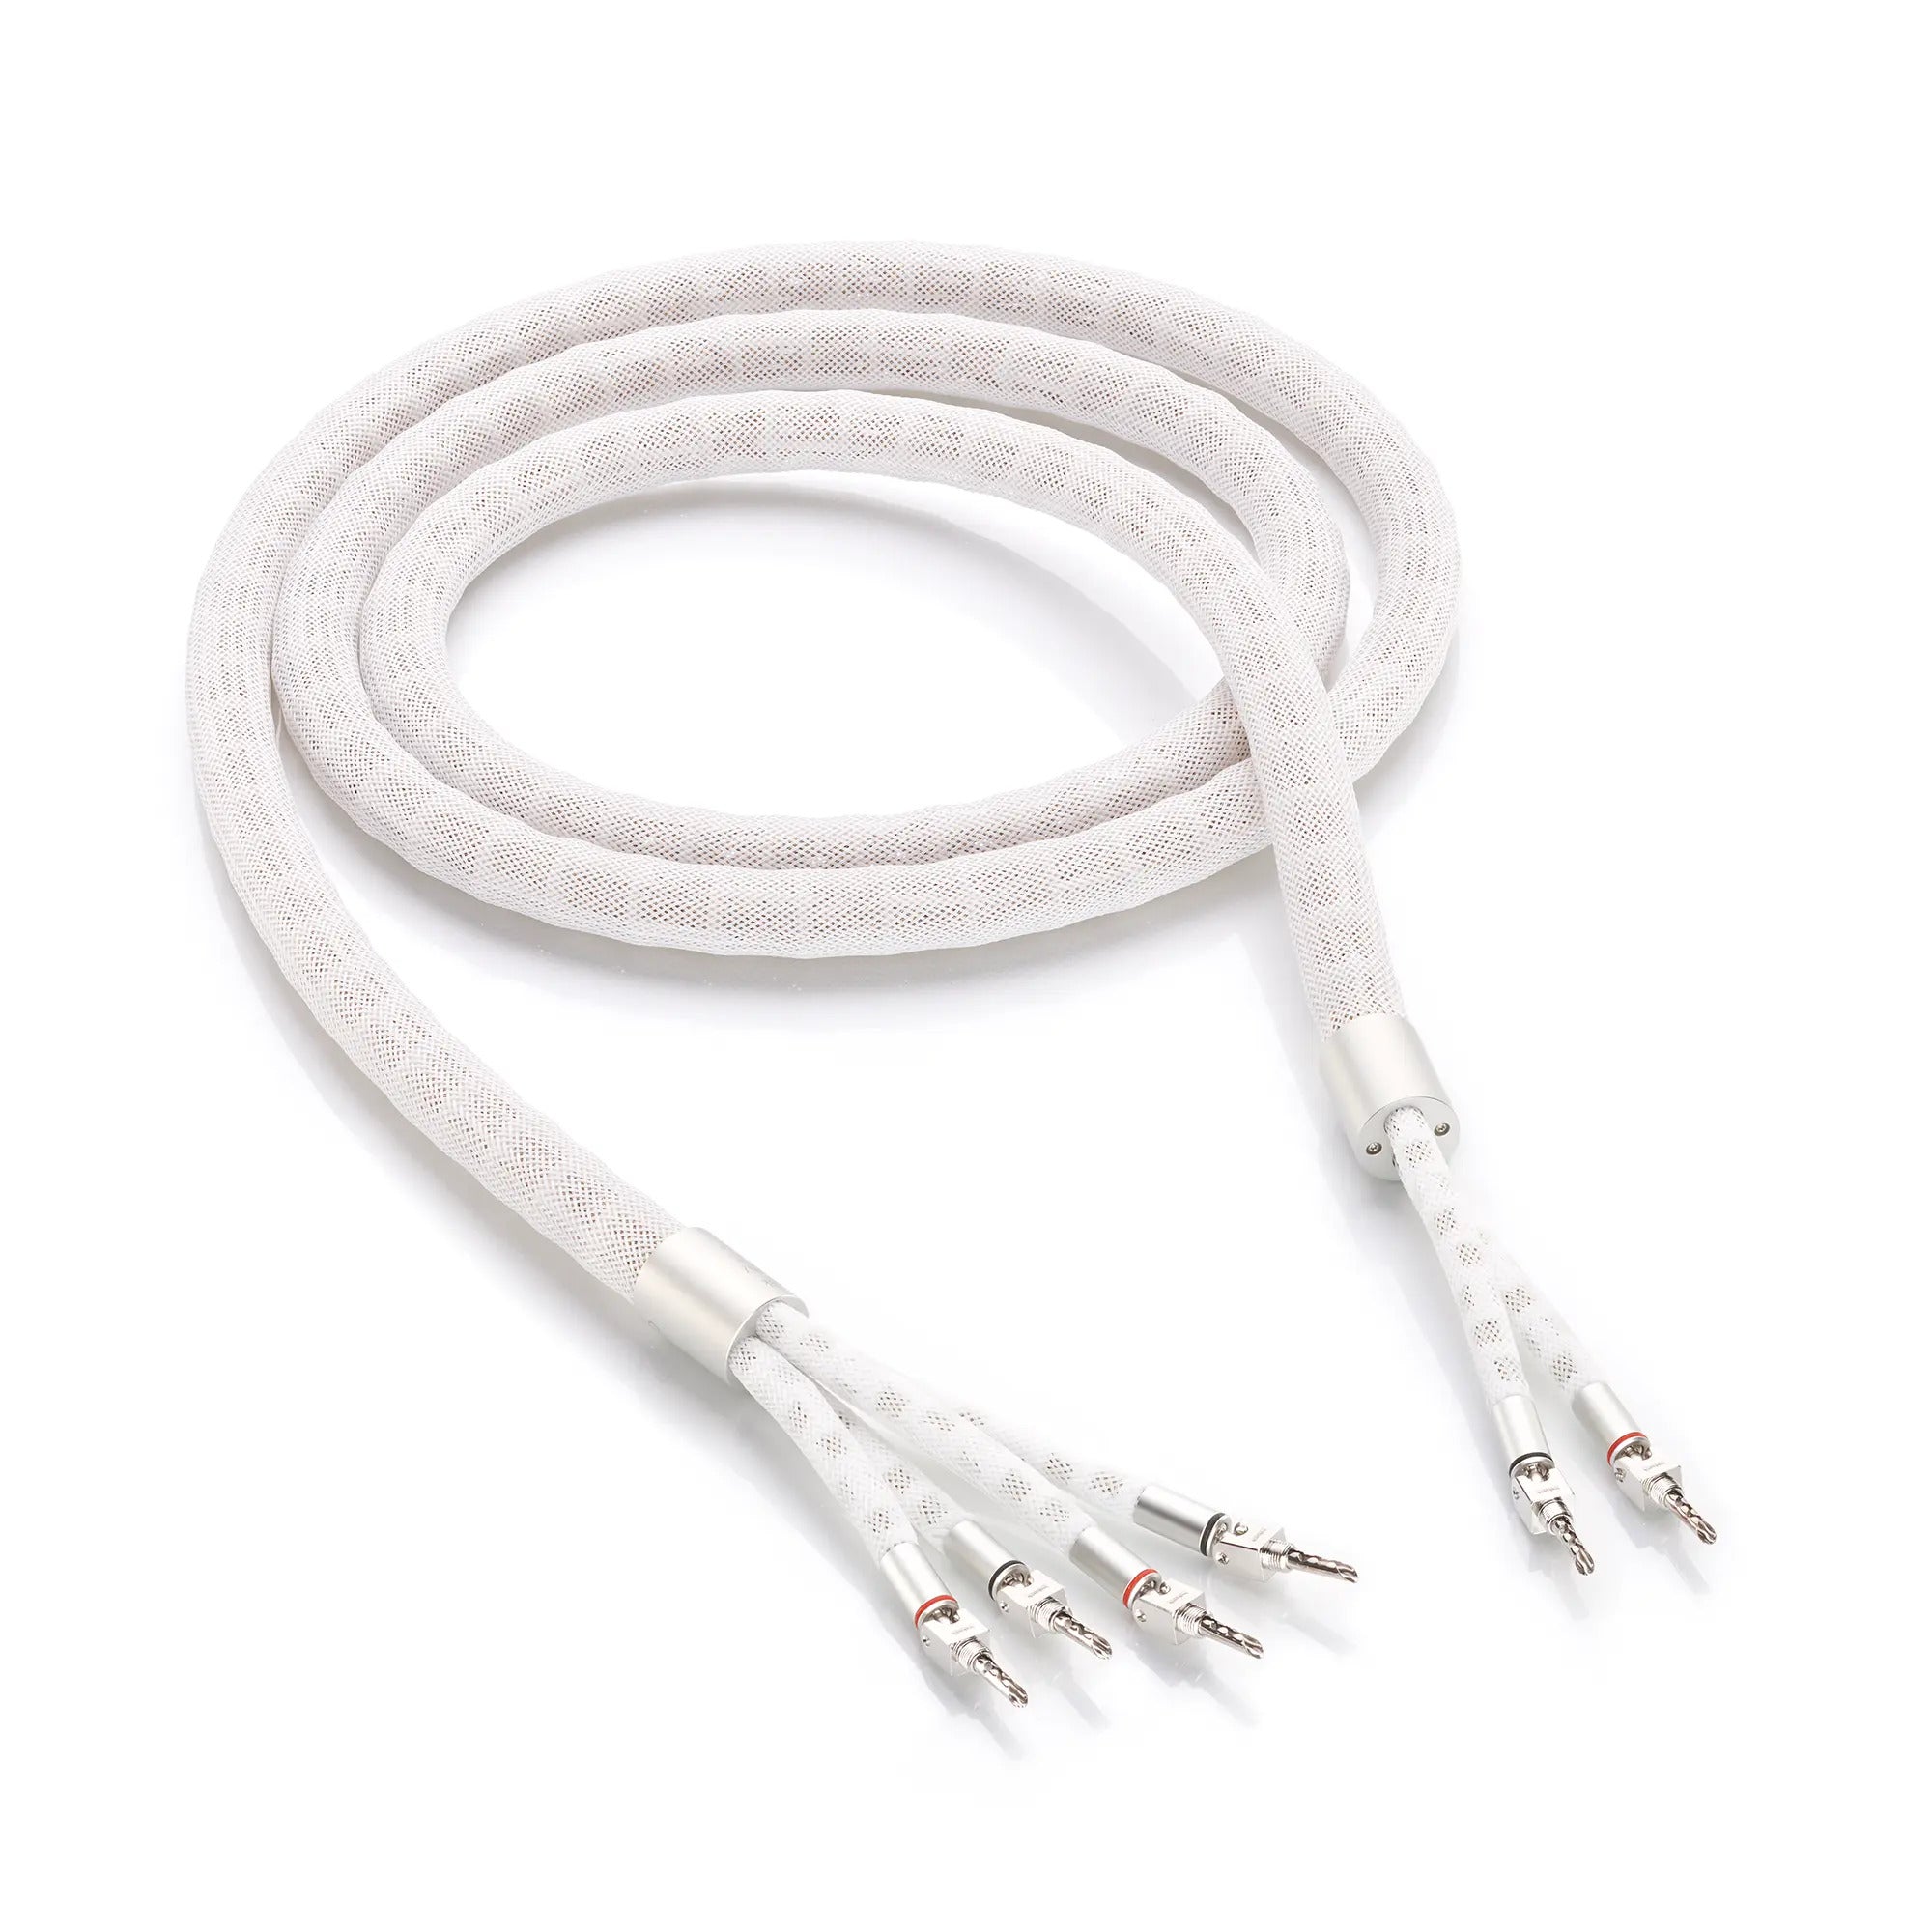 Inakustik Referenz LS-2405 AIR Pure Silver Speaker Cable (pair)